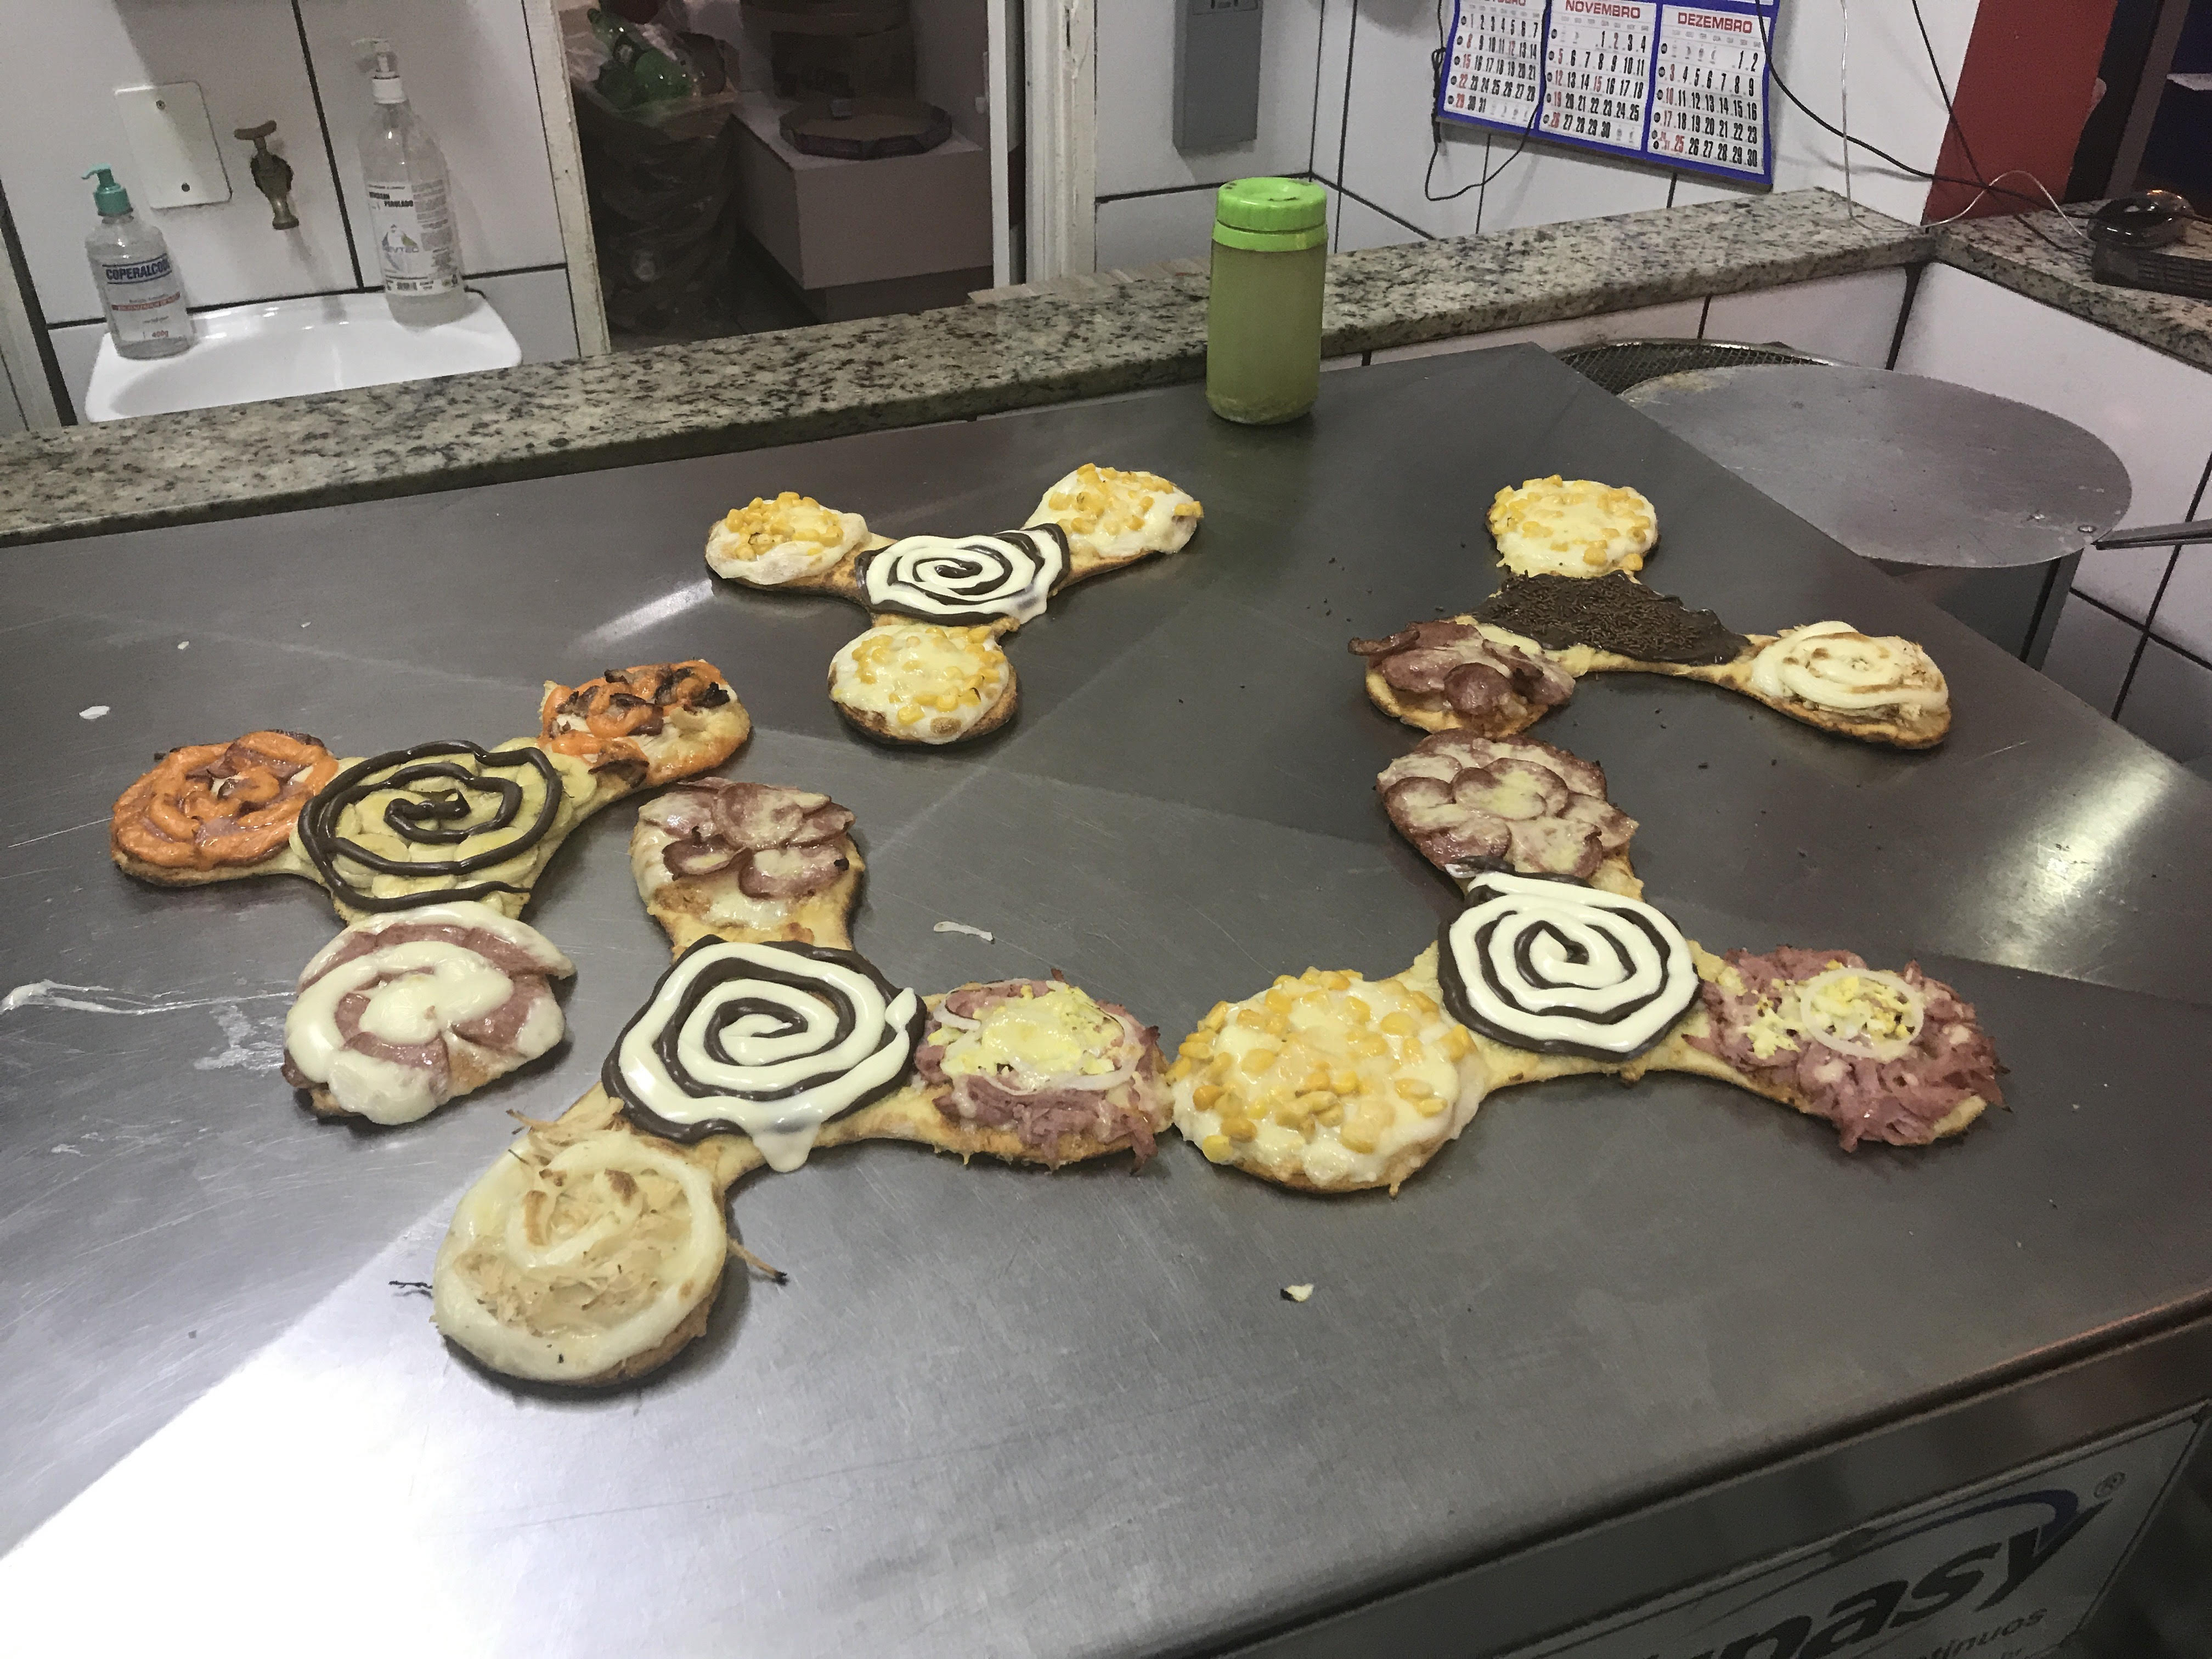 As pizza spinners